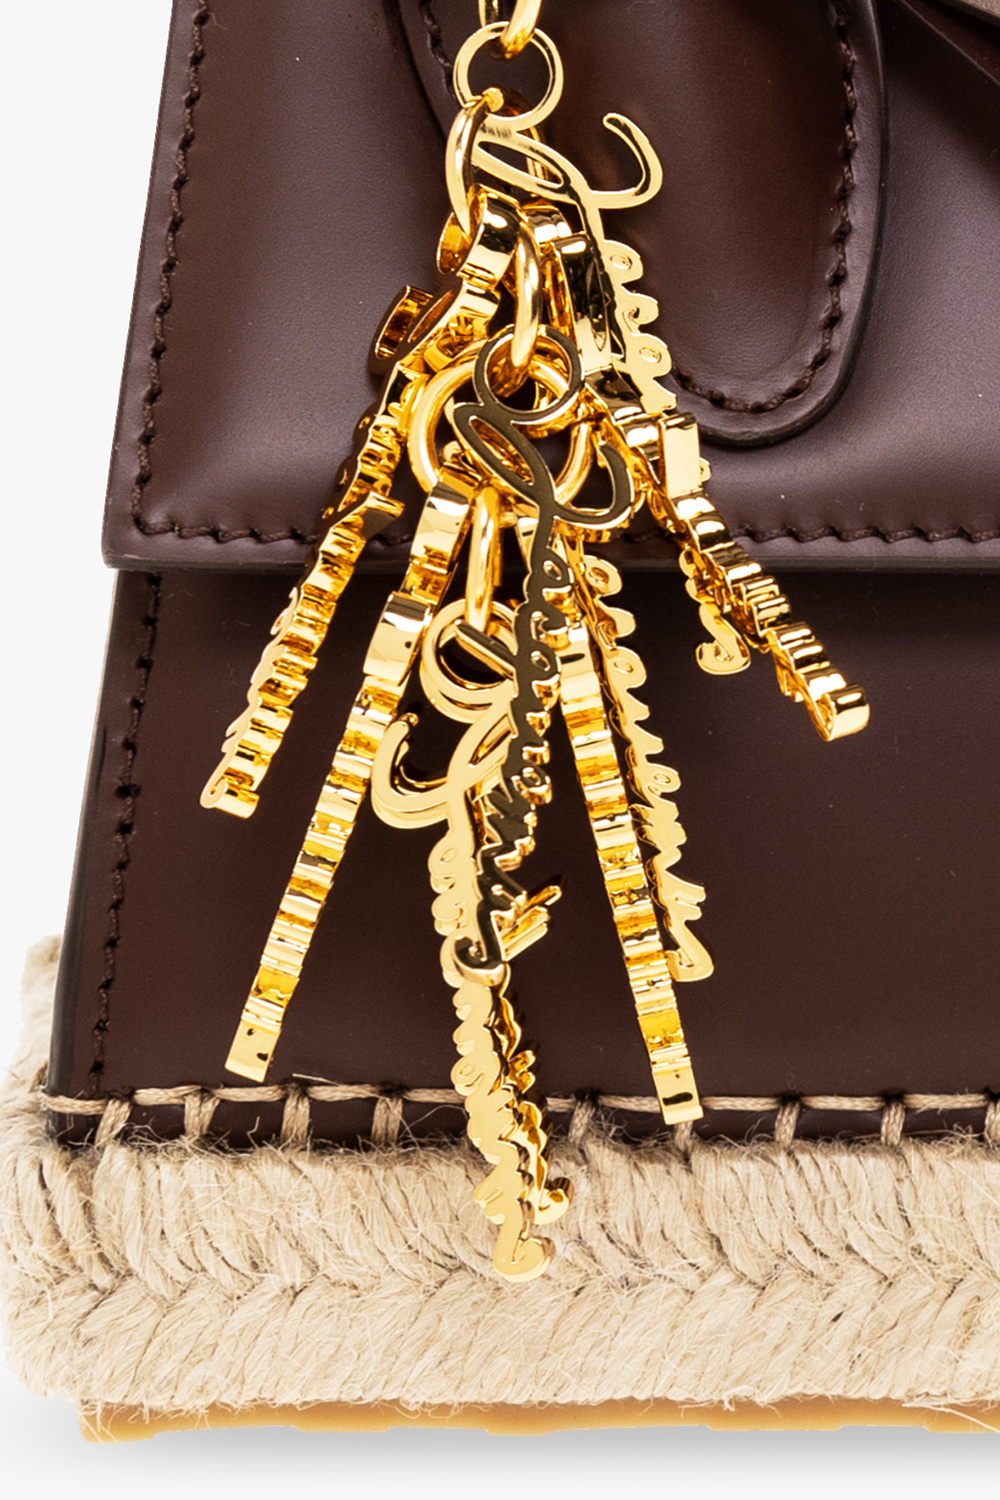 Jacquemus Le Chiquito Moyen Y Brown Bag in Gold Hardware, Luxury